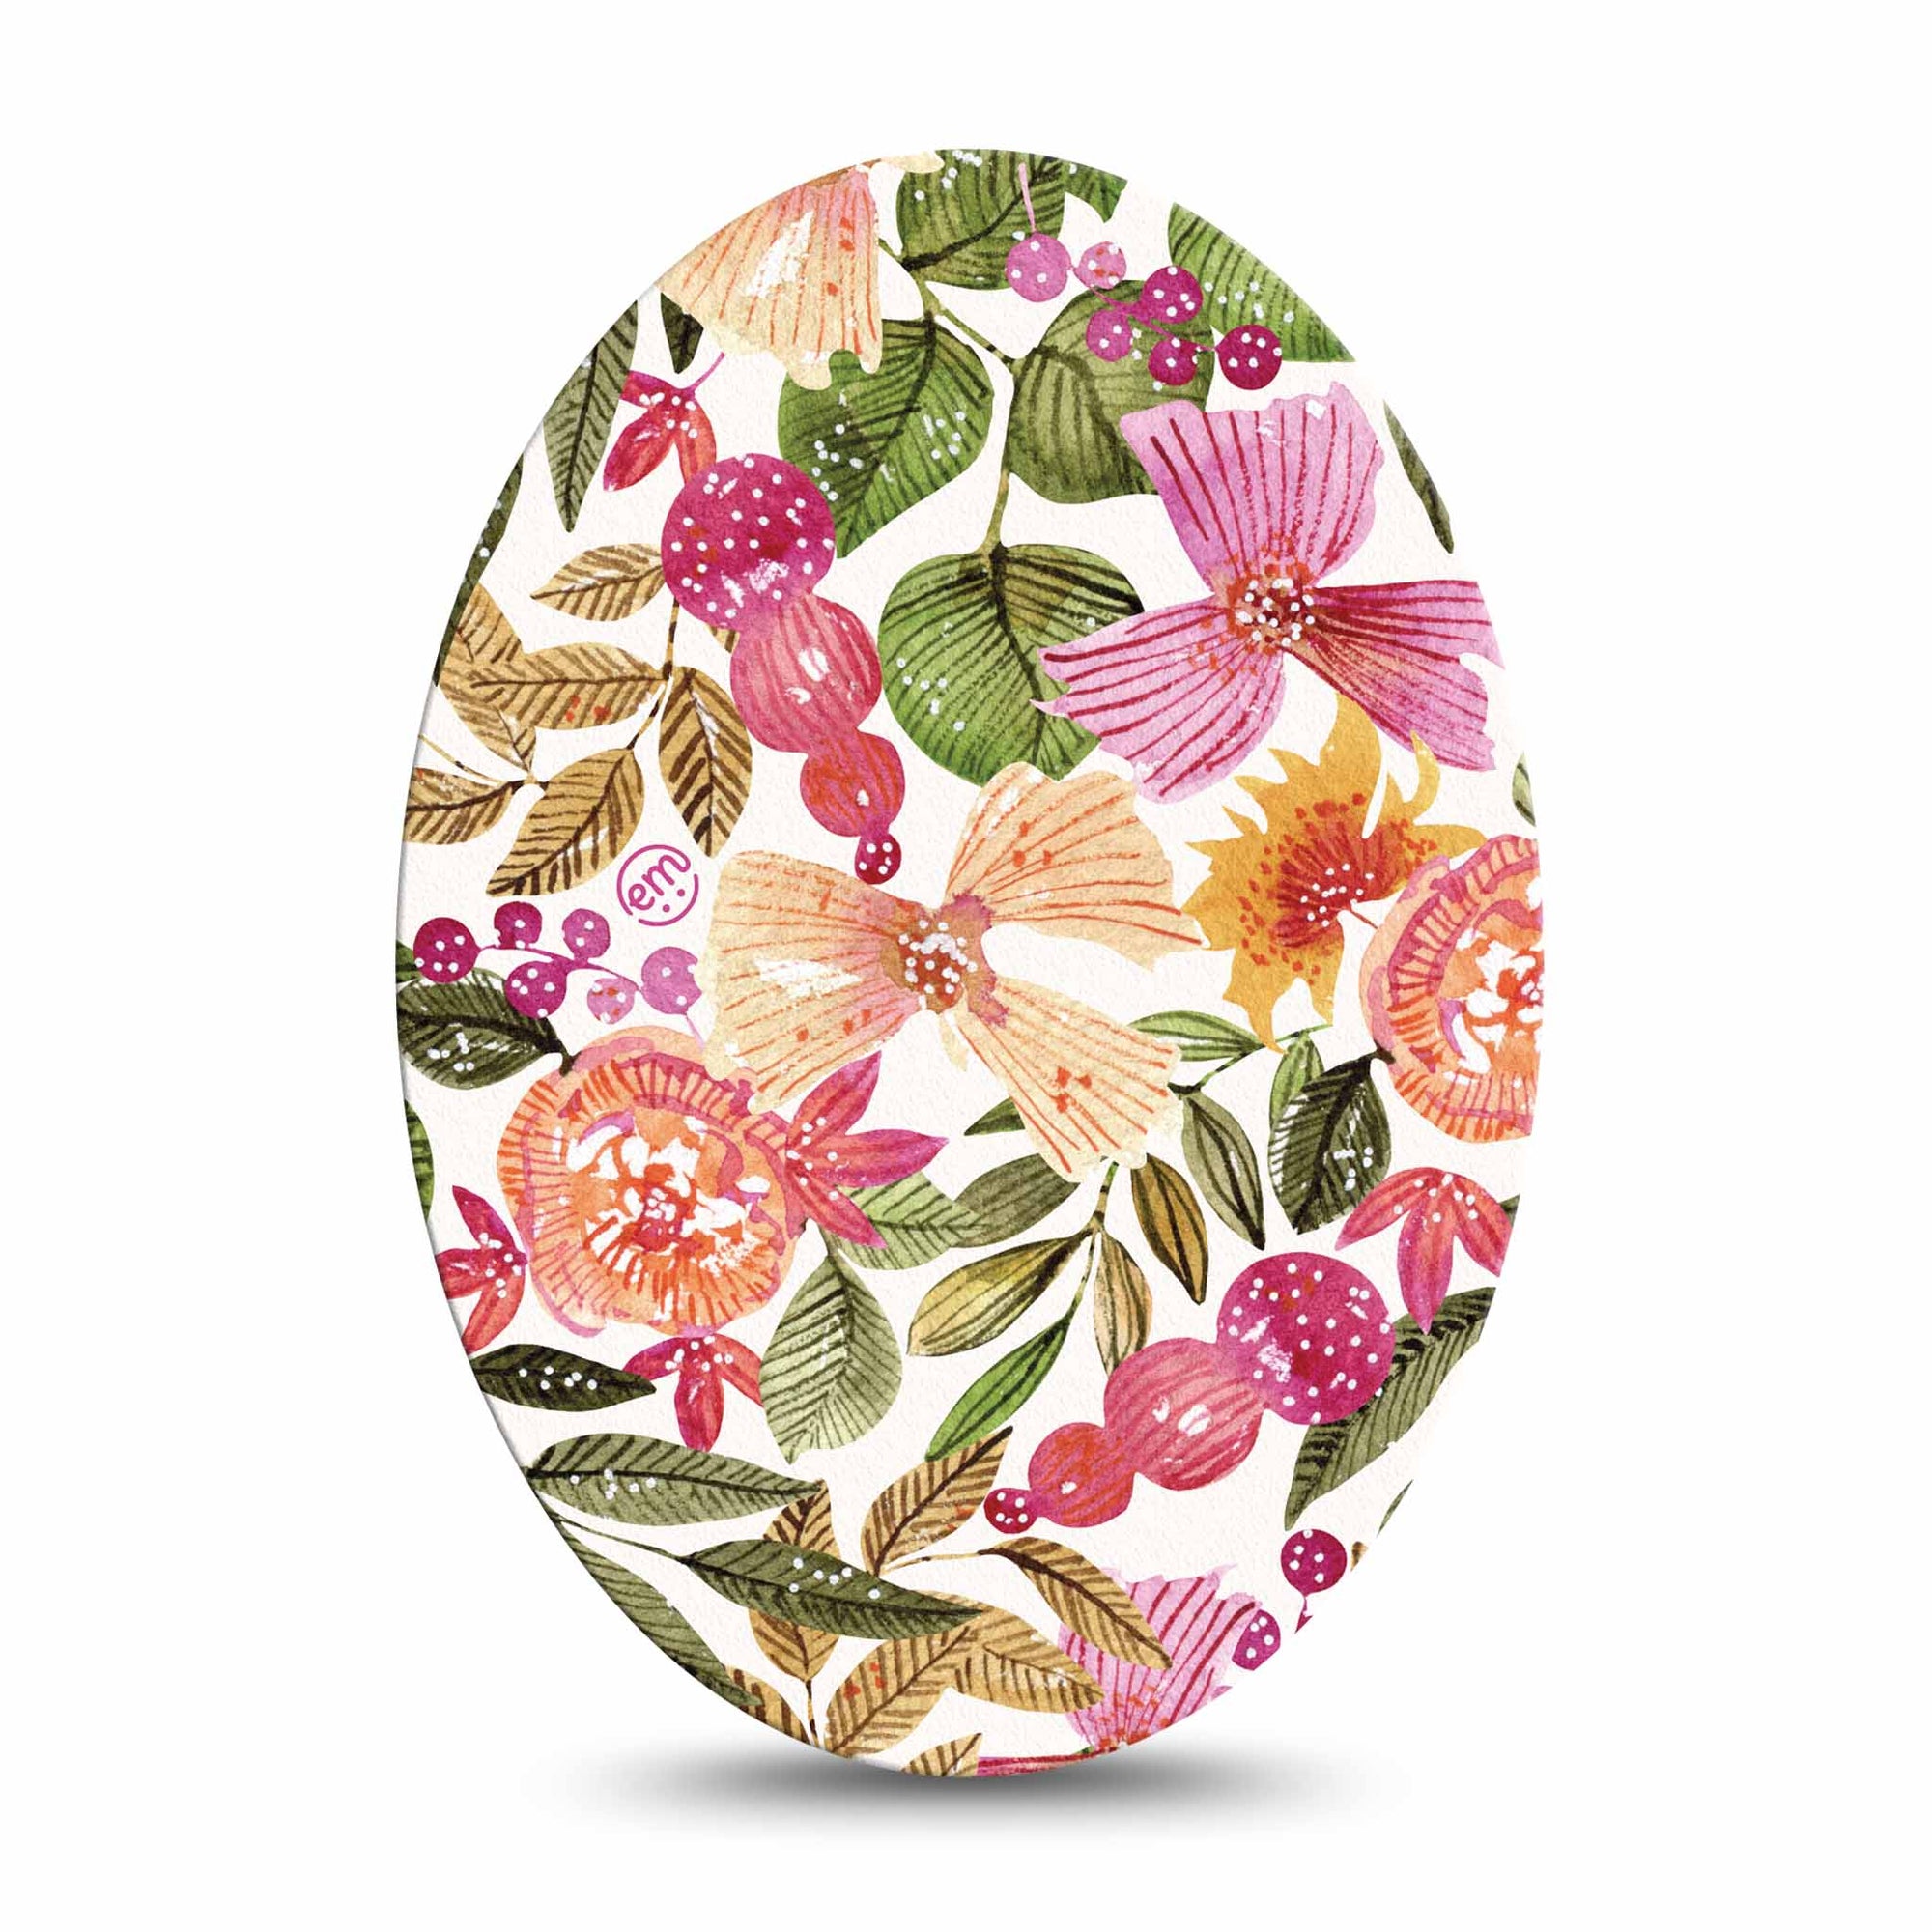 Medtronic Enlite / Guardian Spring Bouquet Universal Oval Tape, Single, Springtime Floral Orange and Pink Artwork Themed, CGM Adhesive Patch Design